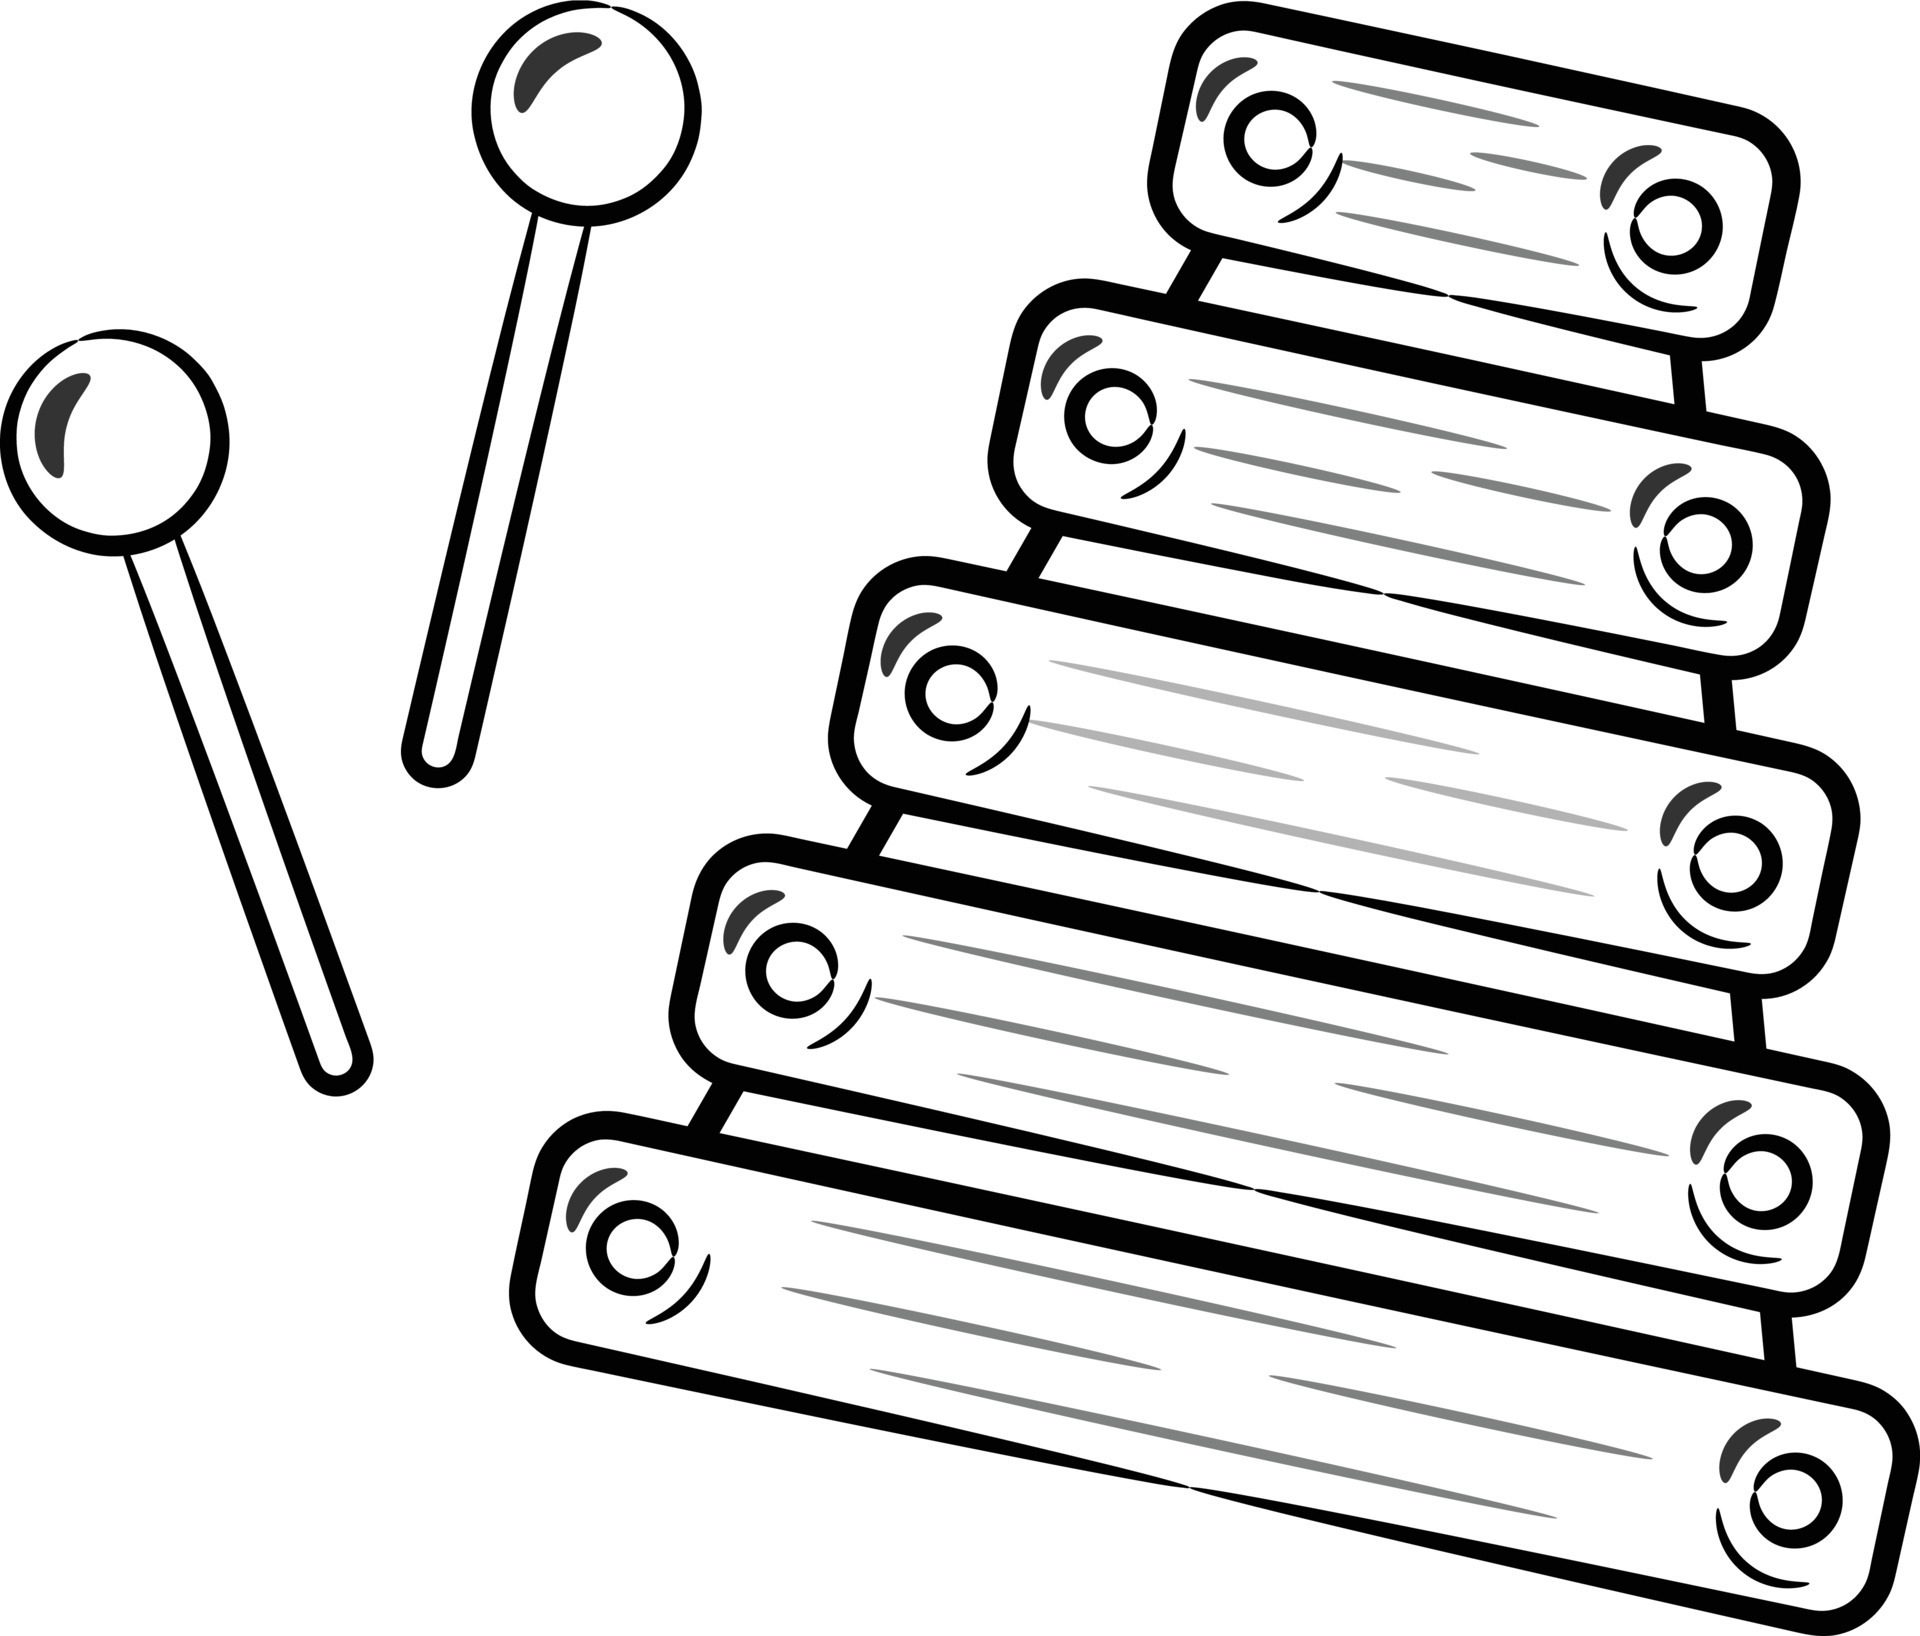 Xylophone colorful and in black with white colors, coloring page. vector  illustration. | CanStock